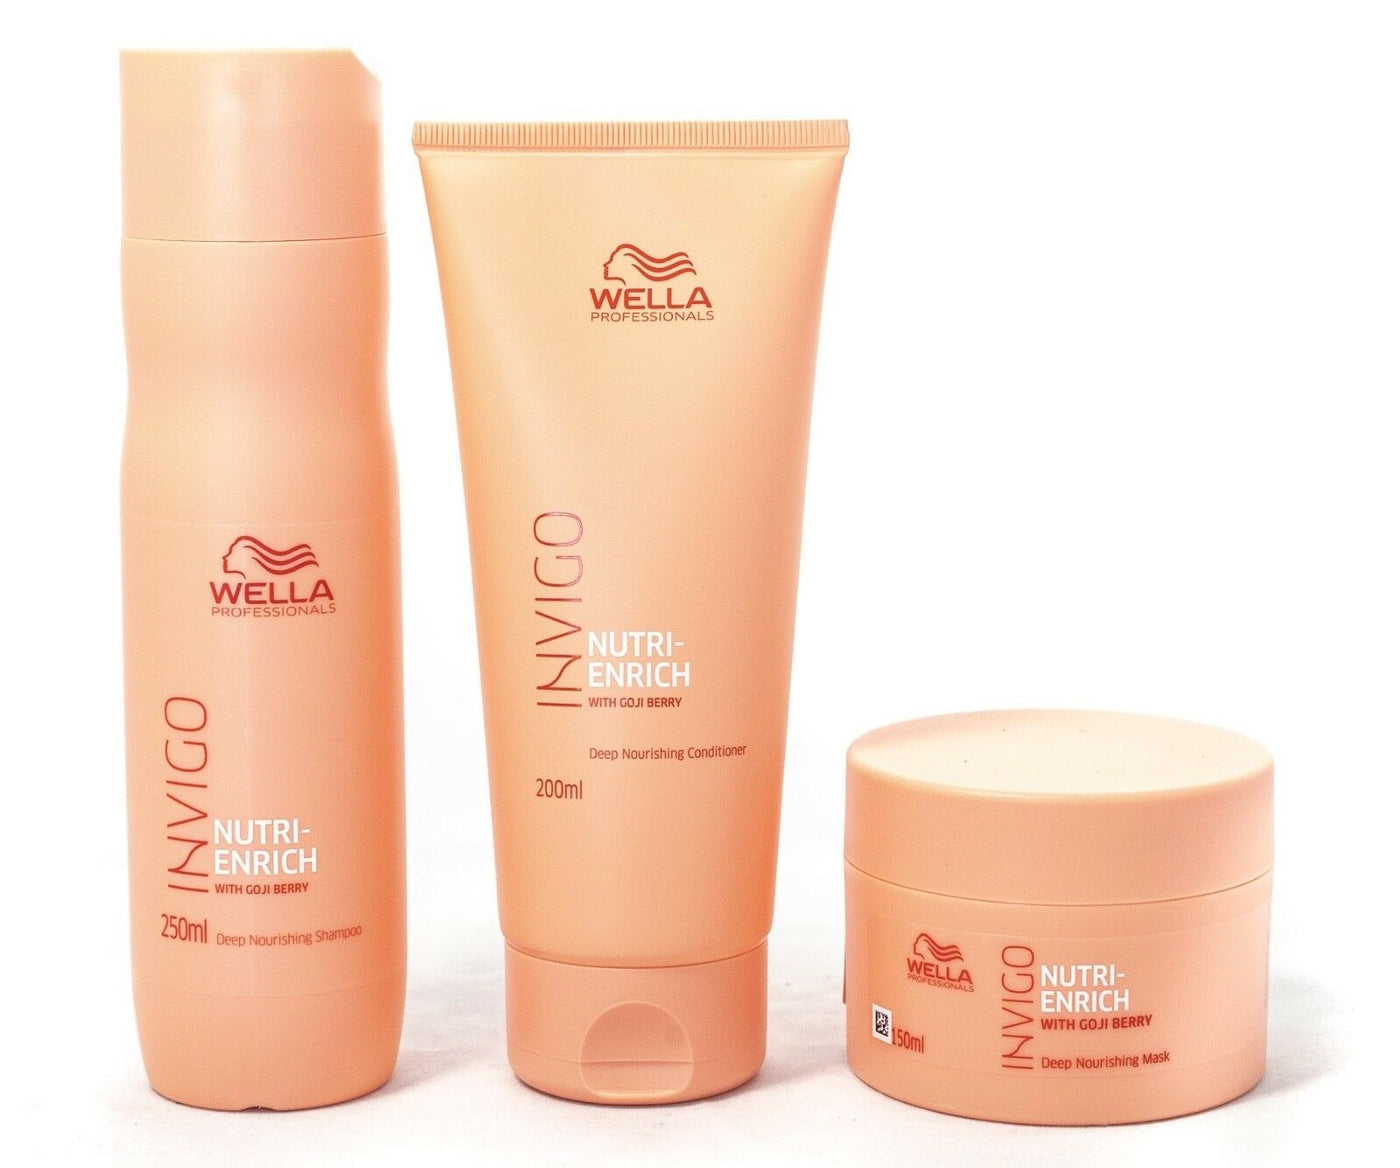 Wella Hair Care - Buy Wella Professionals At Hairhouse | Hairhouse